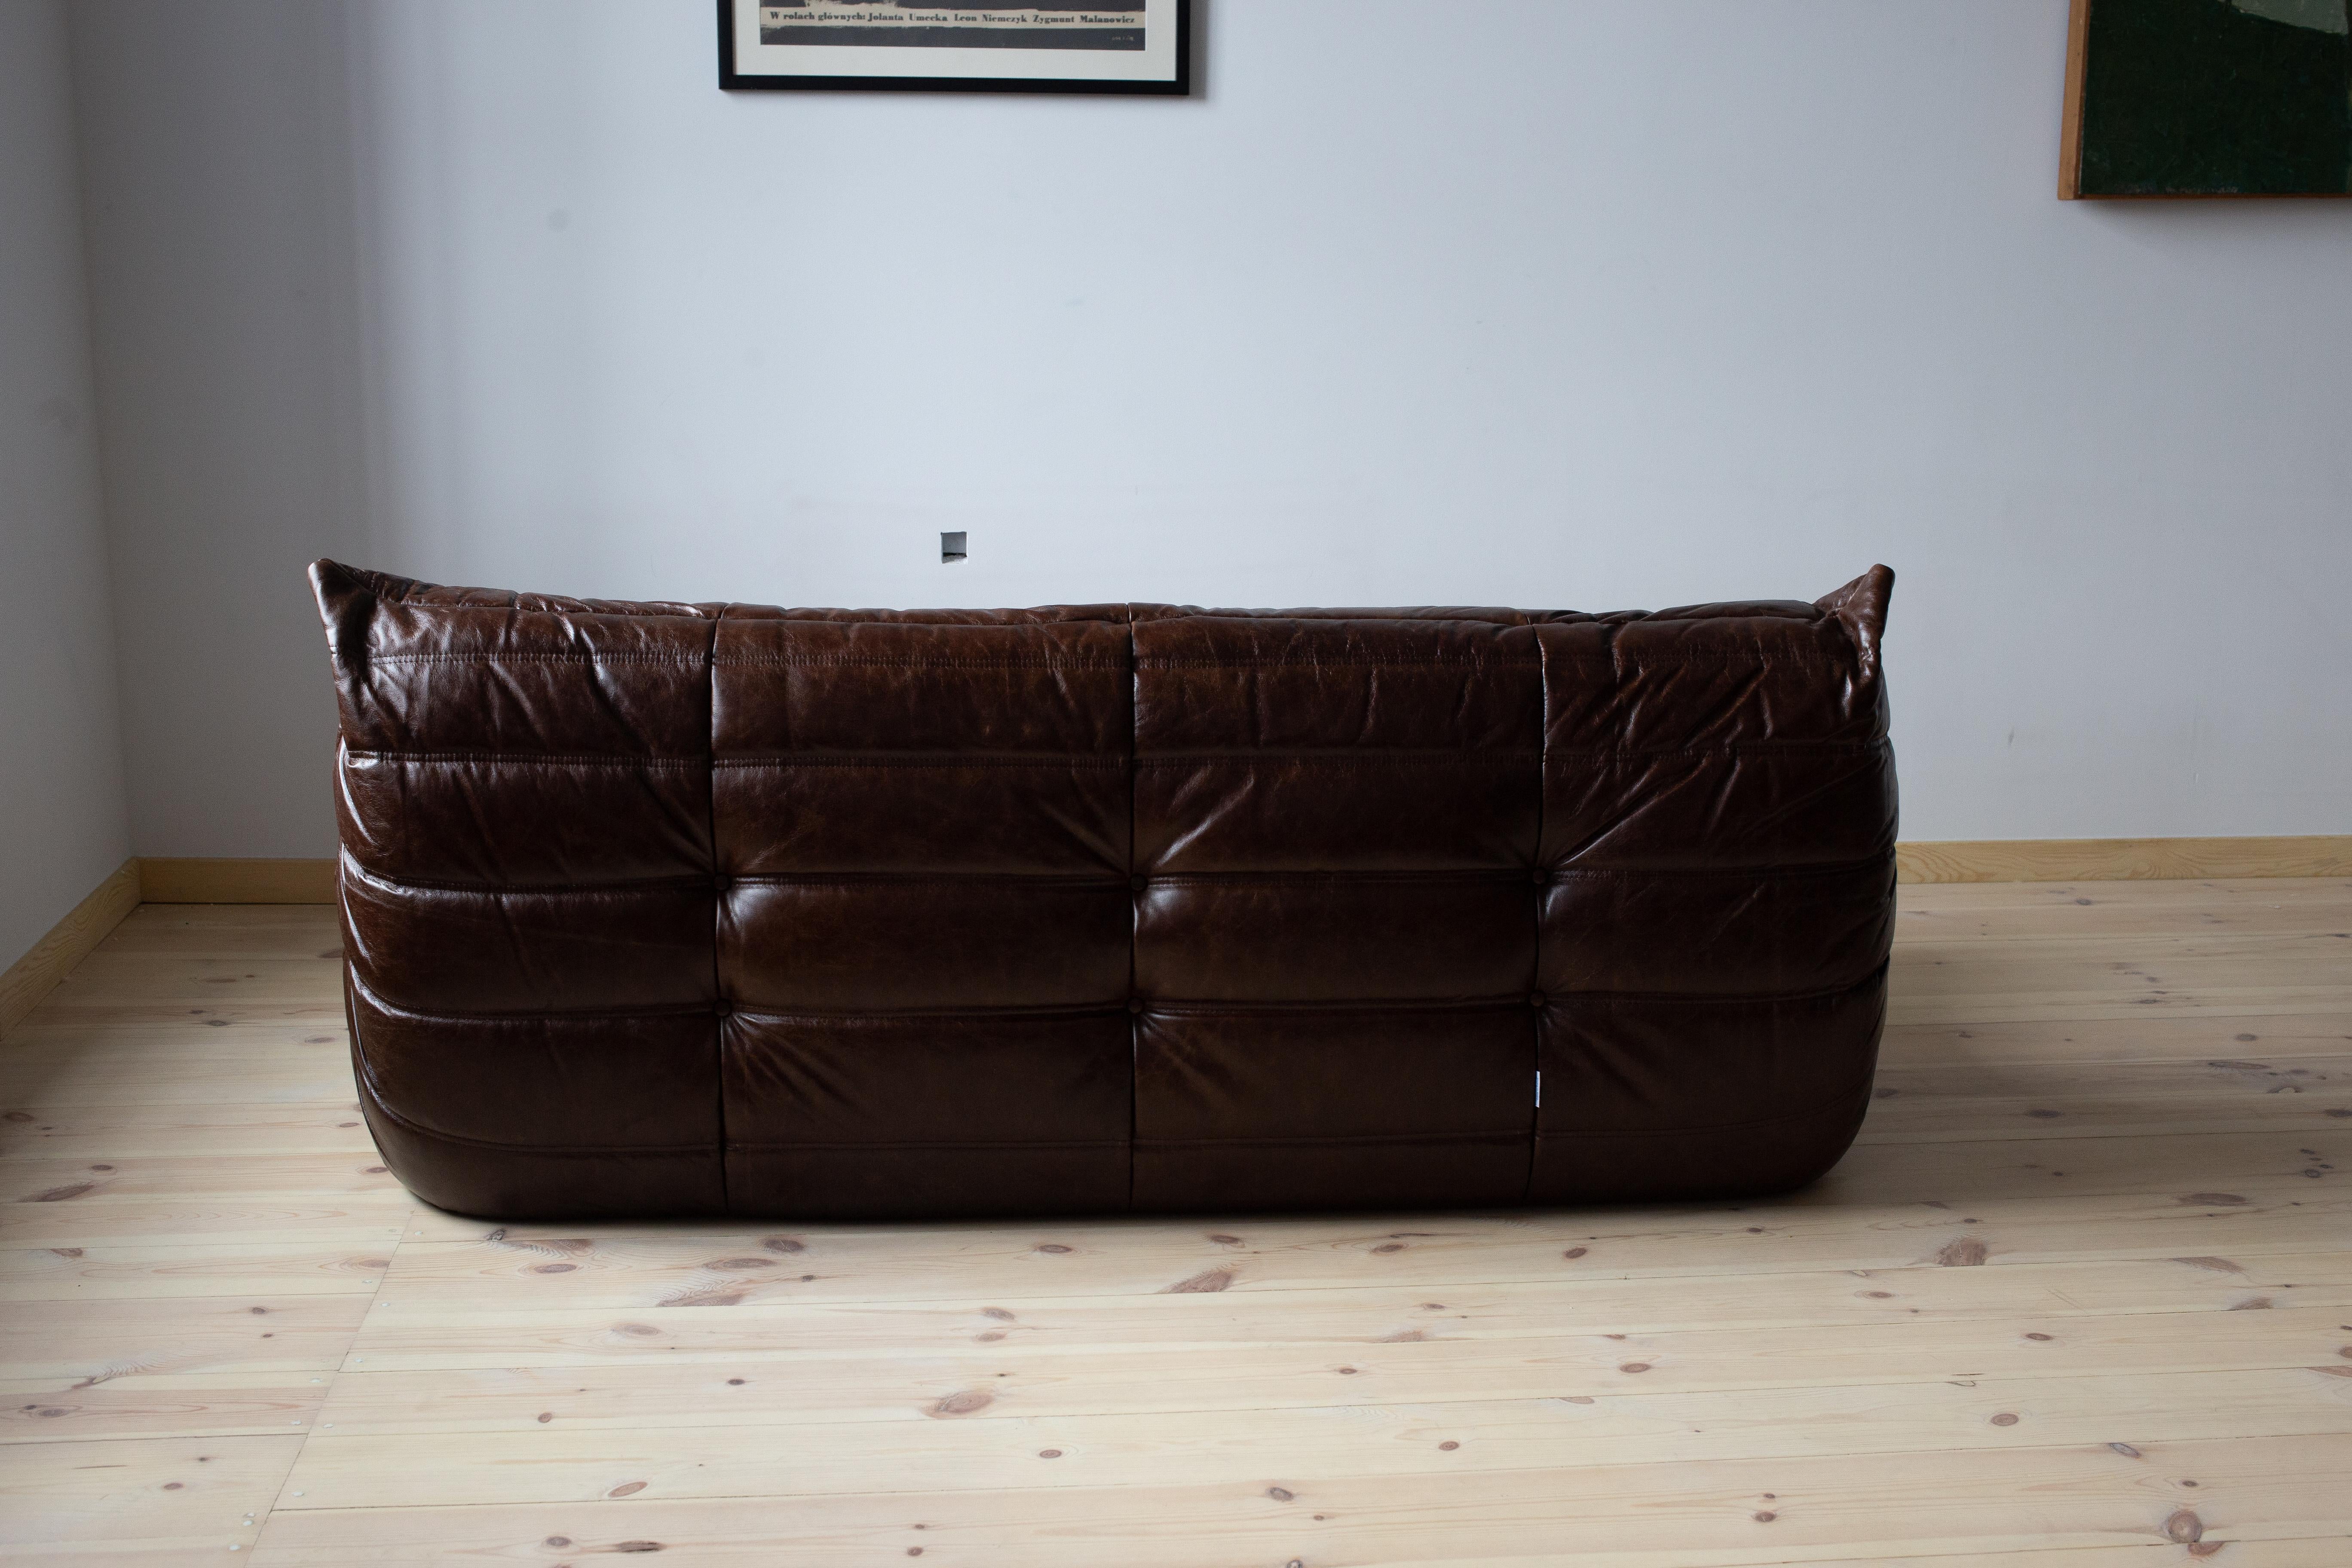 Late 20th Century Togo 3-Seat Sofa in Brown Dubai Leather by Michel Ducaroy for Ligne Roset For Sale